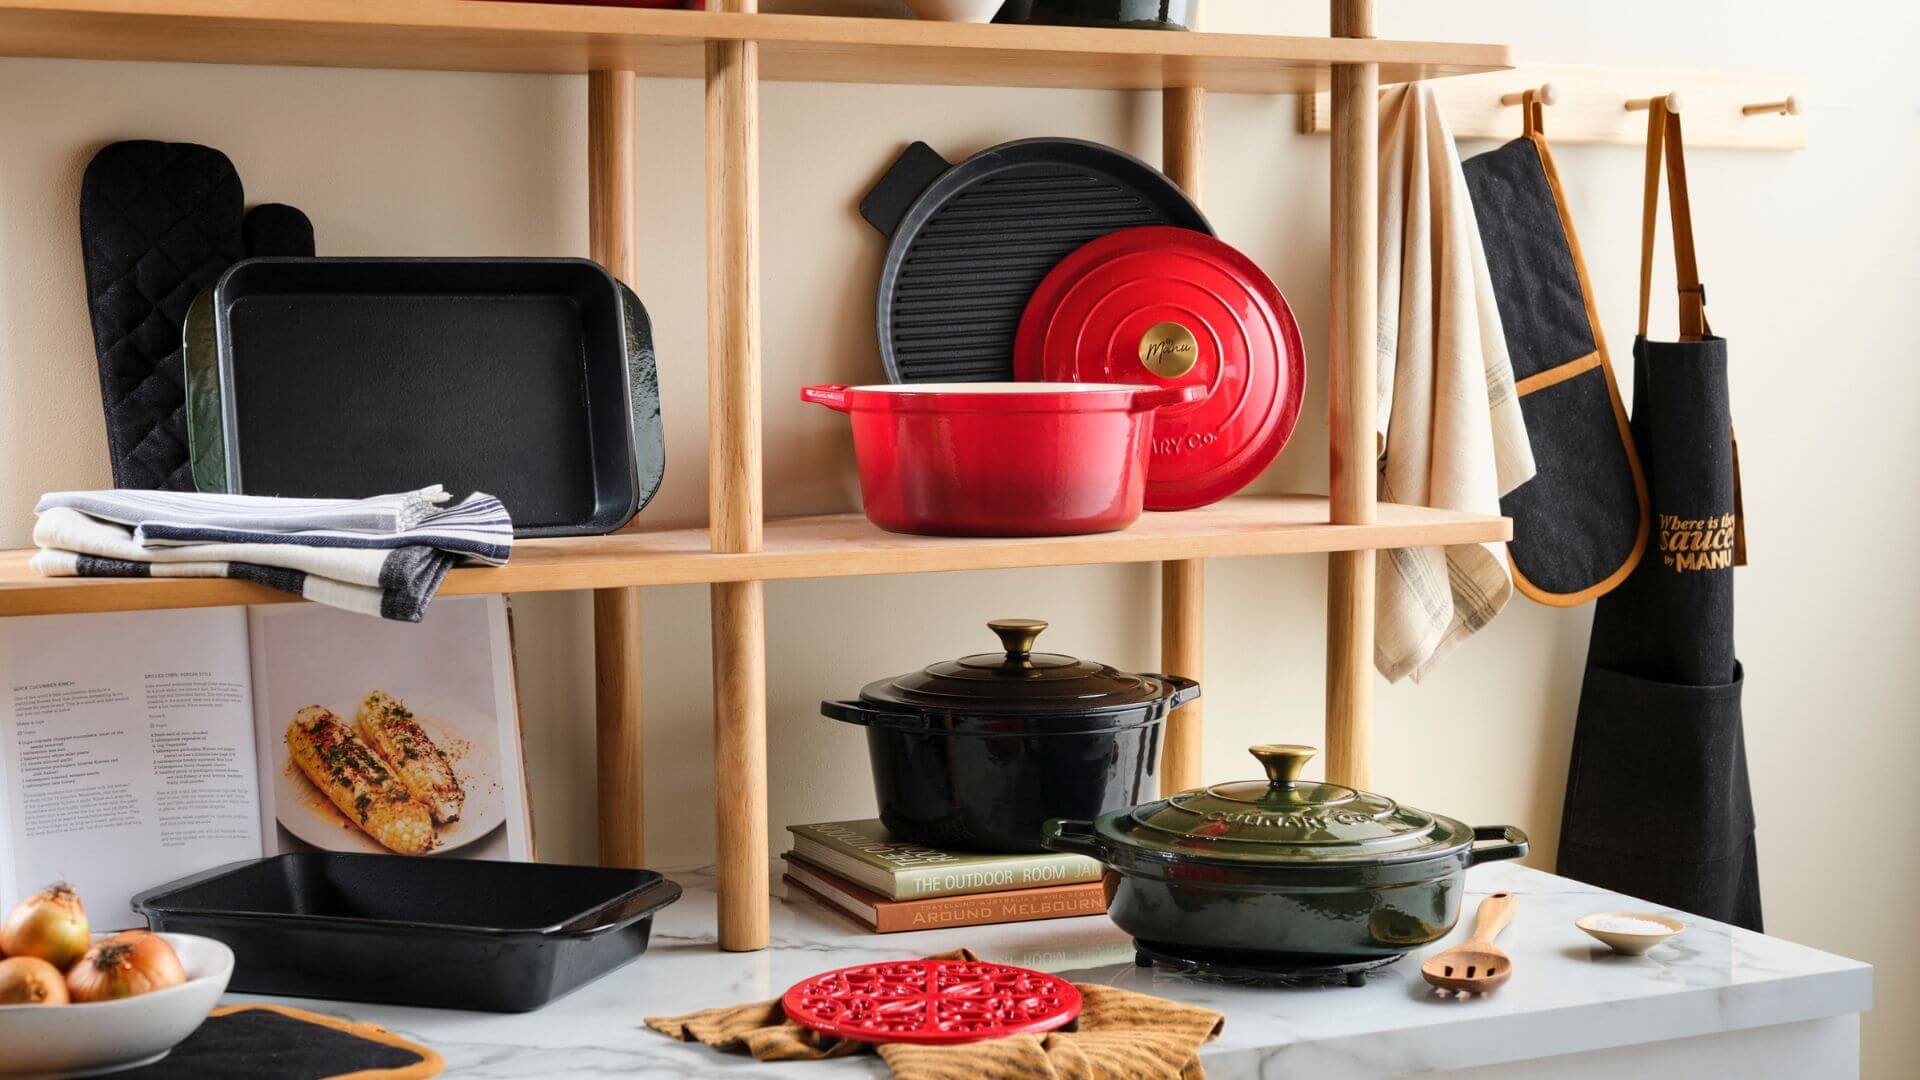 How To Season and Care For Cast Iron Cookware